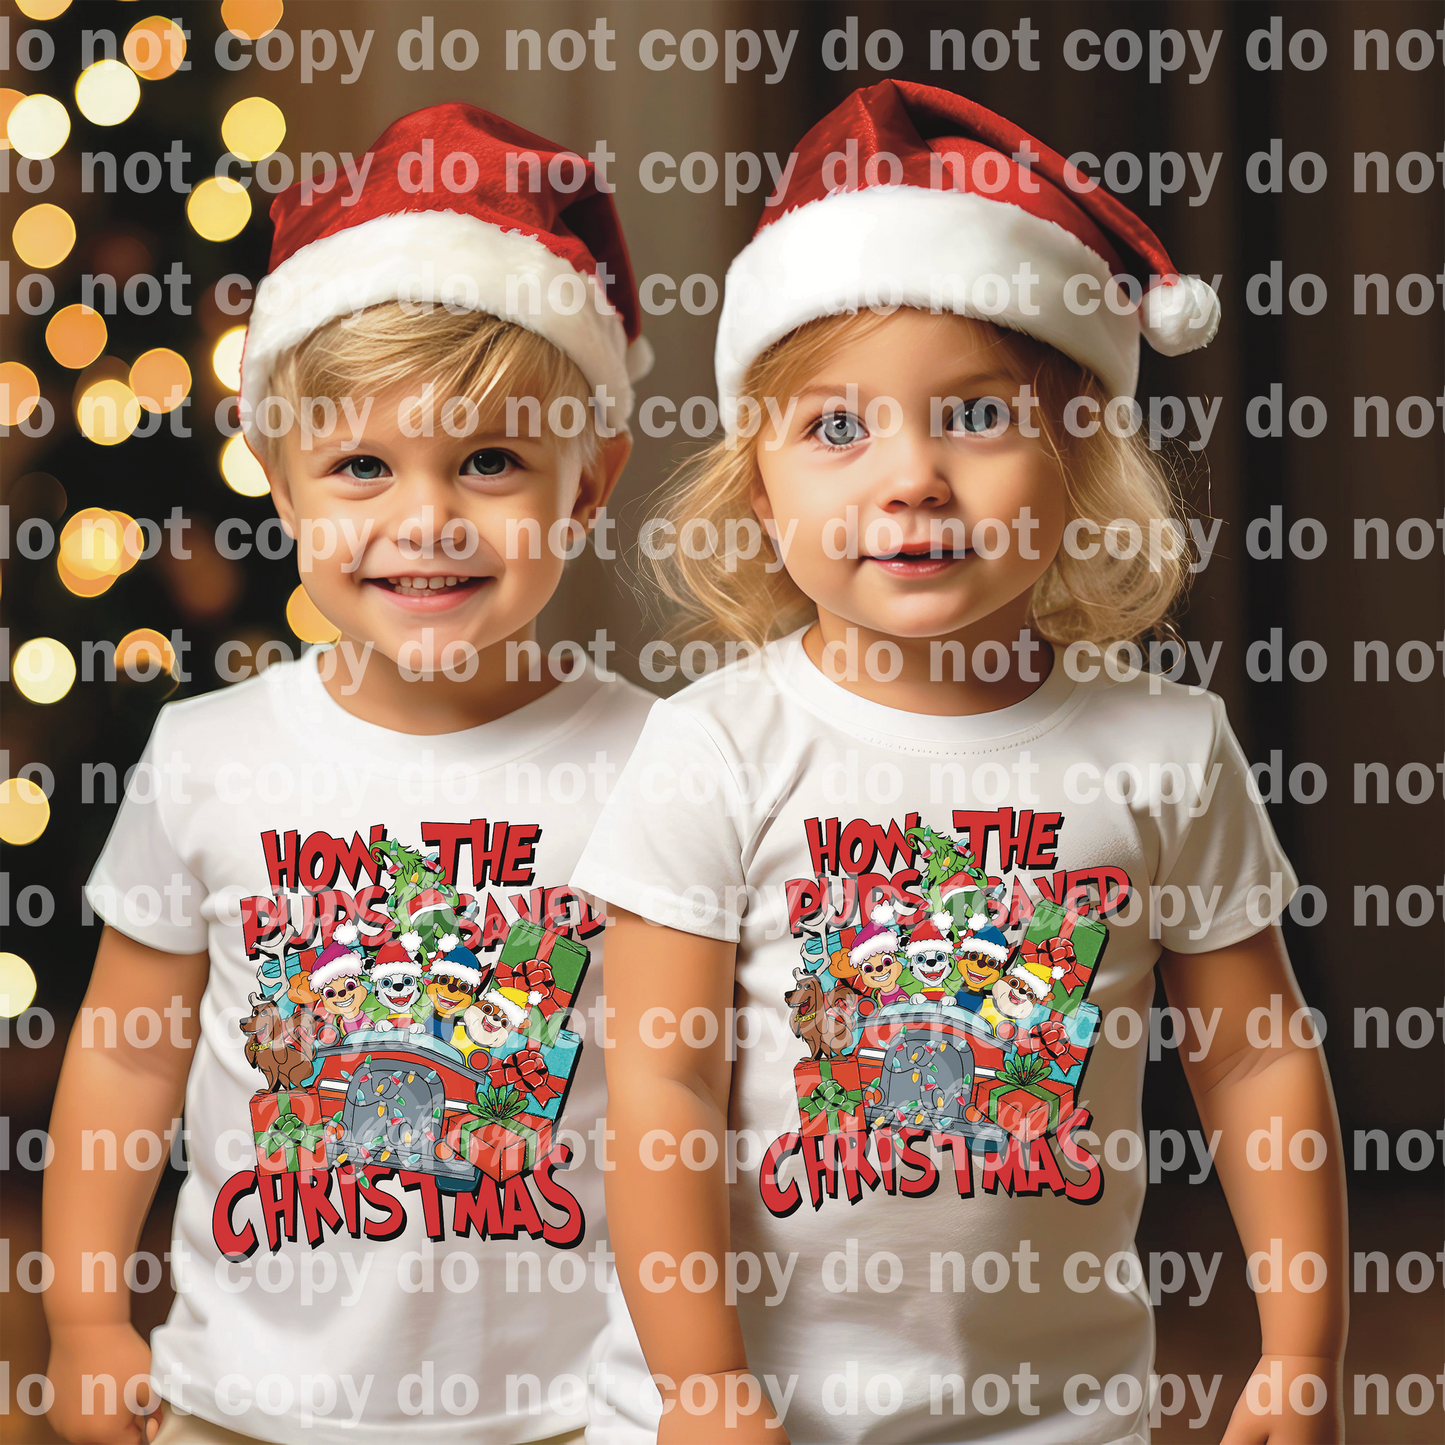 How The Pups Saved Christmas Dream Print or Sublimation Print